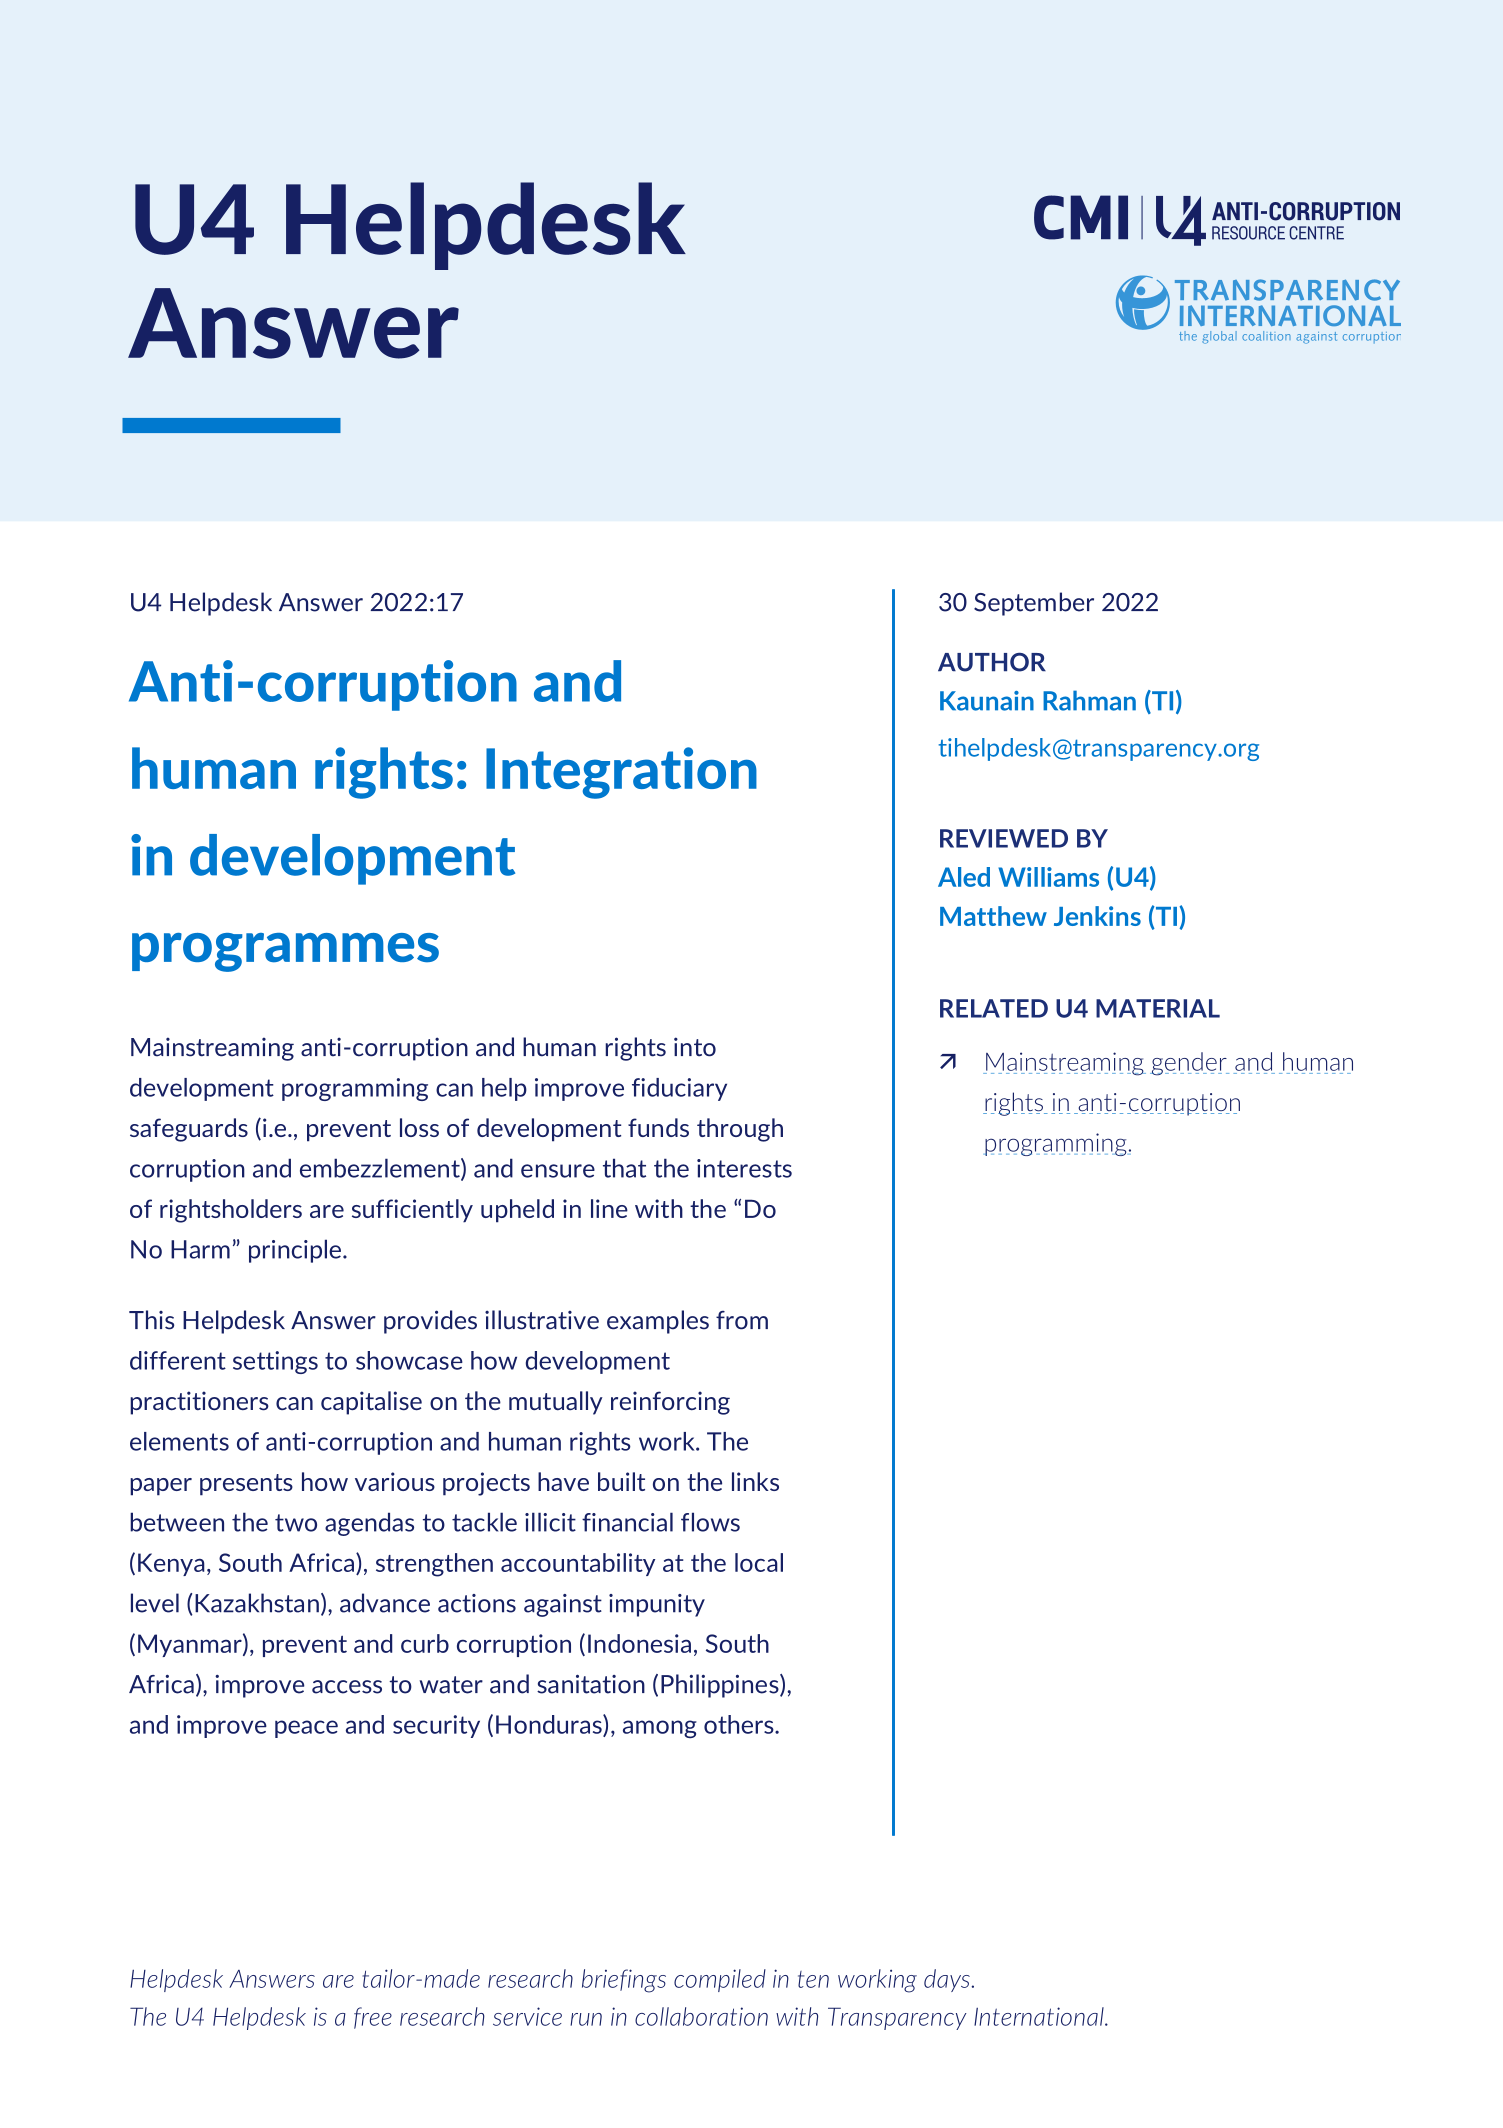 Anti-corruption and human rights: Integration in development programmes